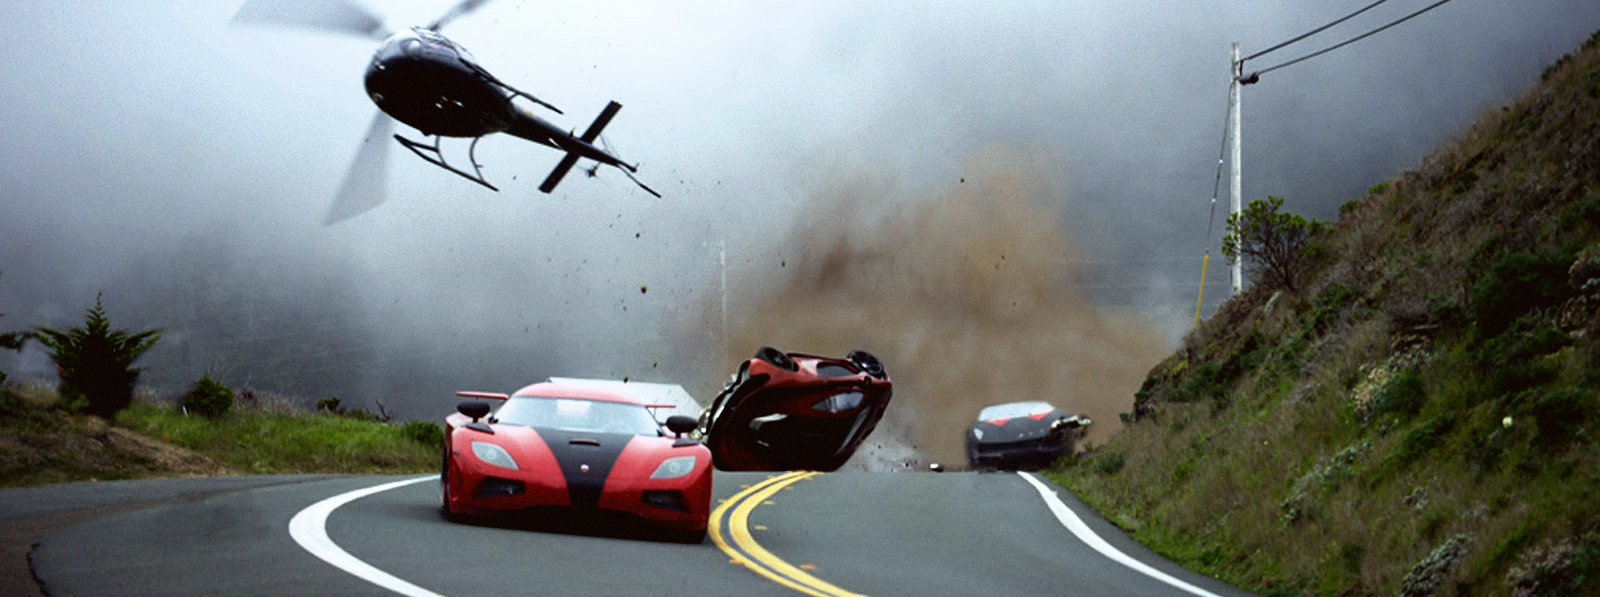 Images from Need for Speed, 2014